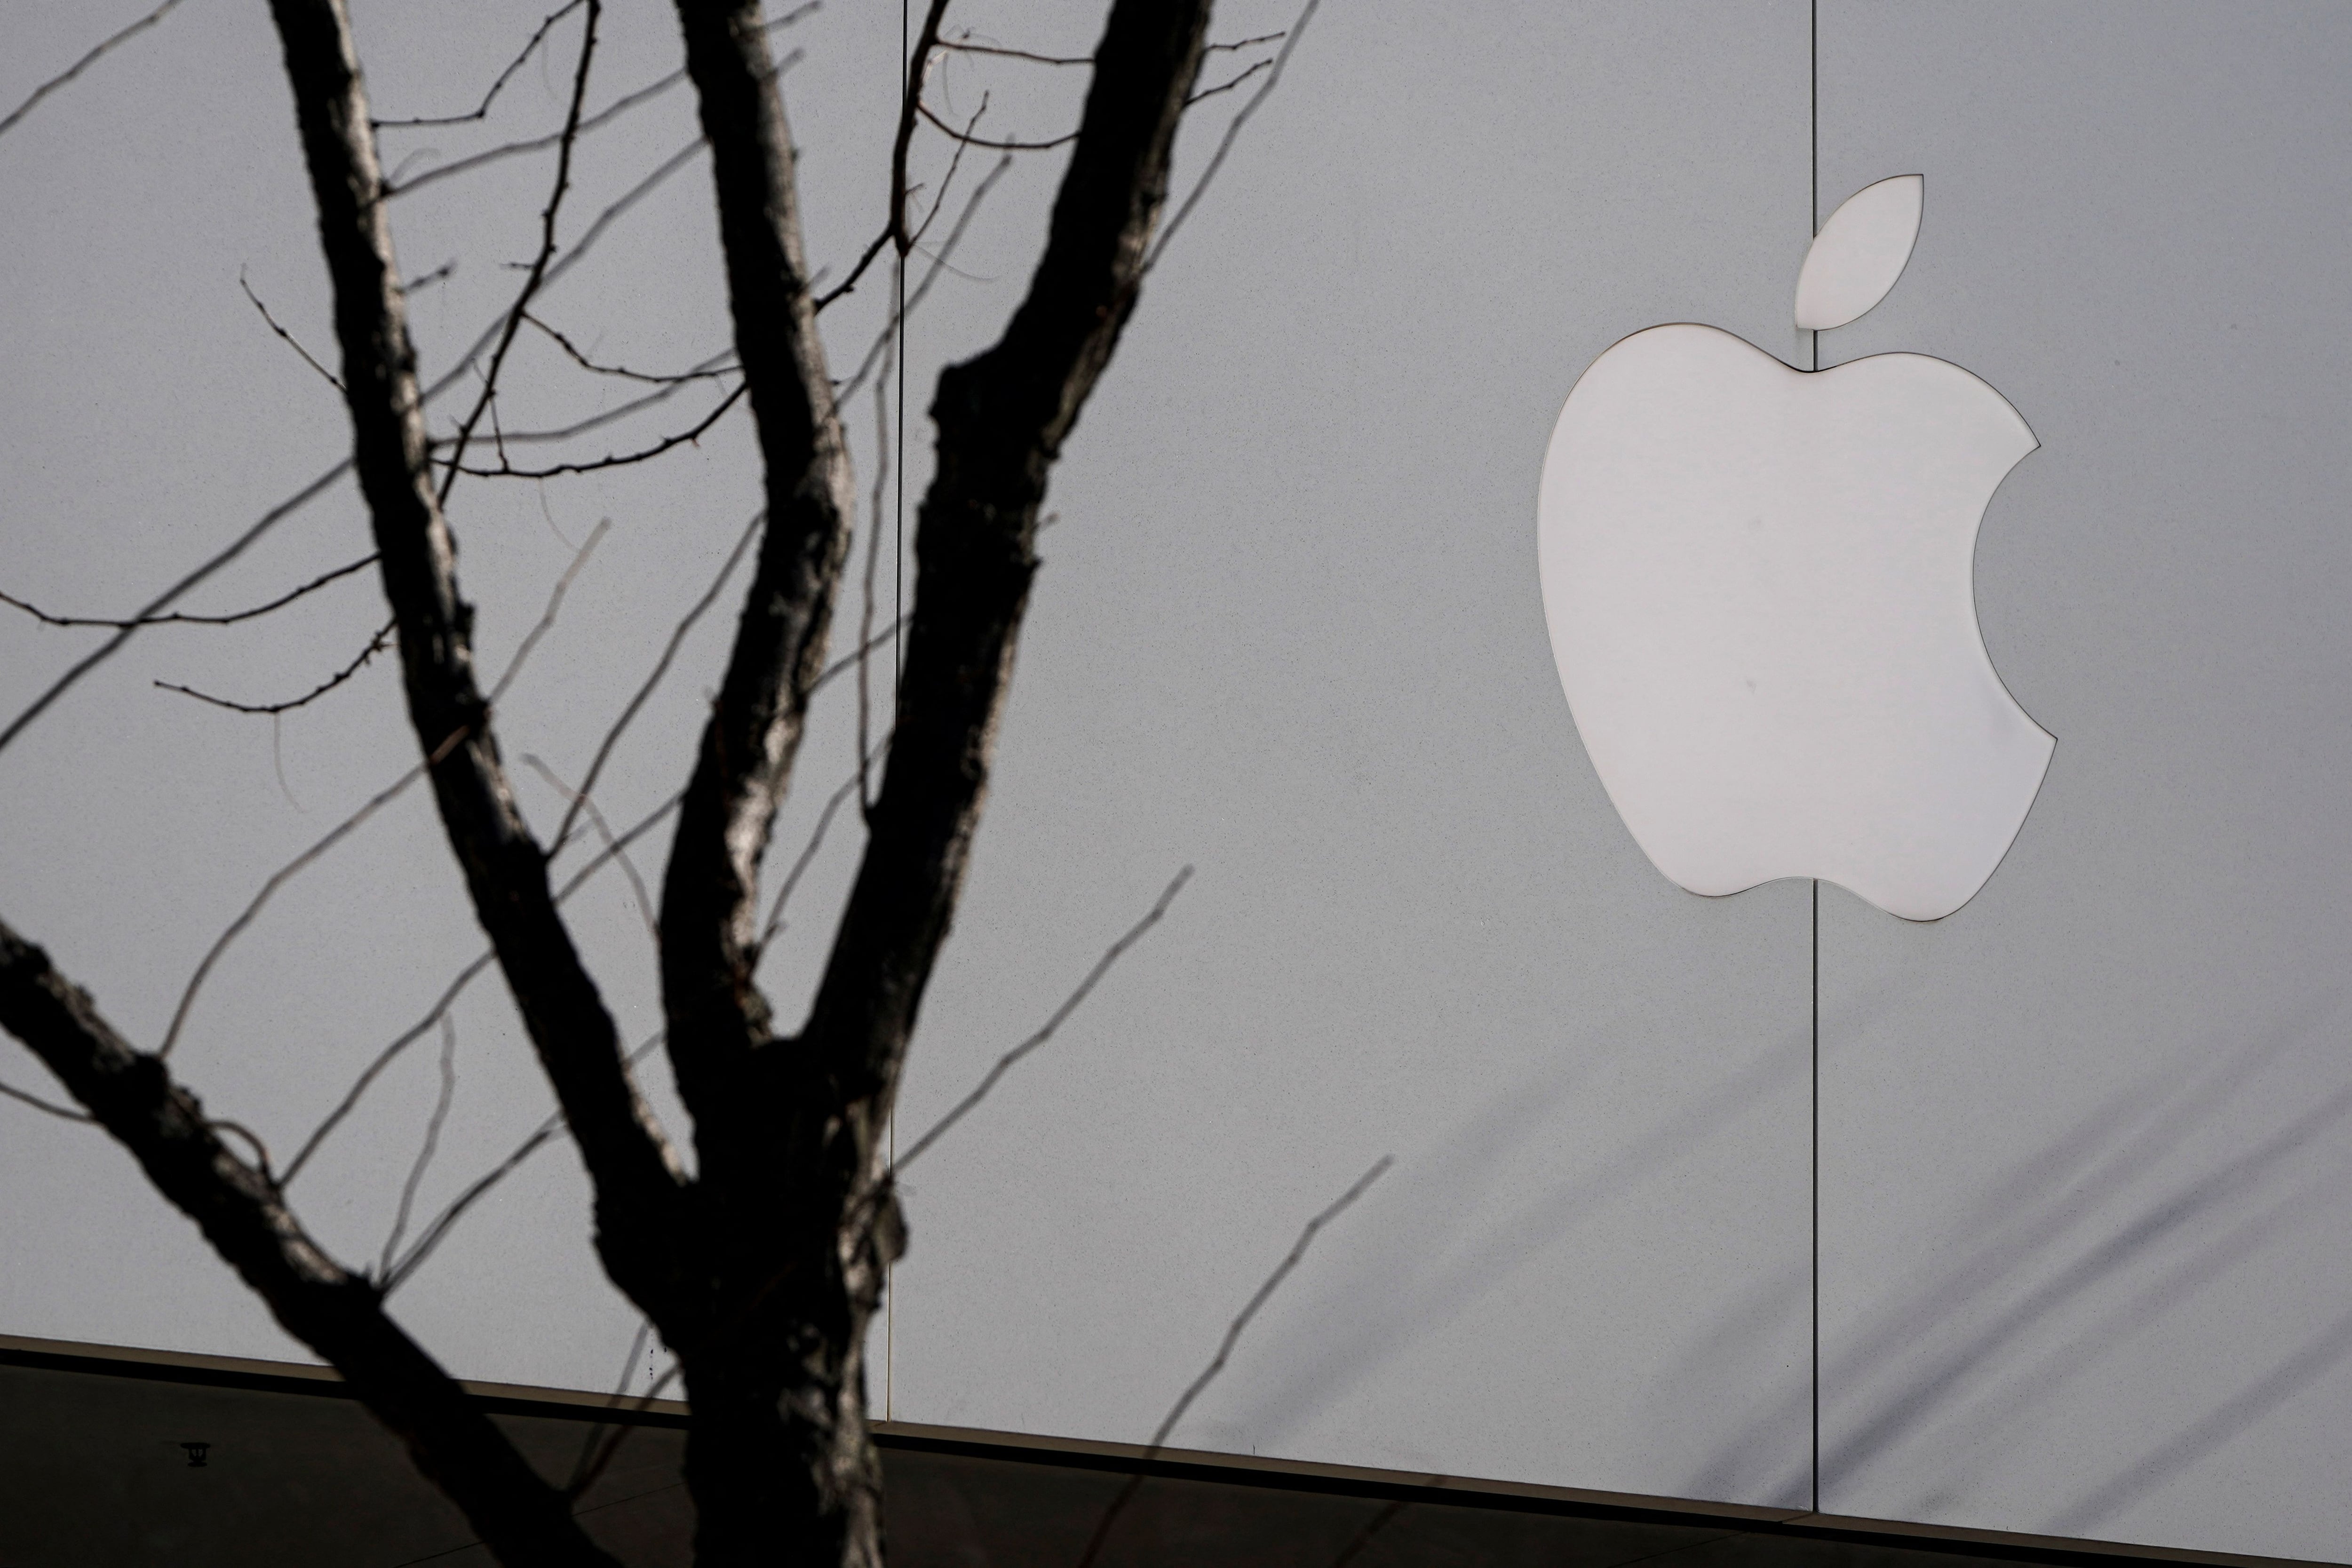 Logo of an Apple store is seen as Apple Inc. reports fourth quarter earnings in Arlington, Virginia, U.S., January 27, 2022. REUTERS/Joshua Roberts REFILE - CORRECTING LOCATION